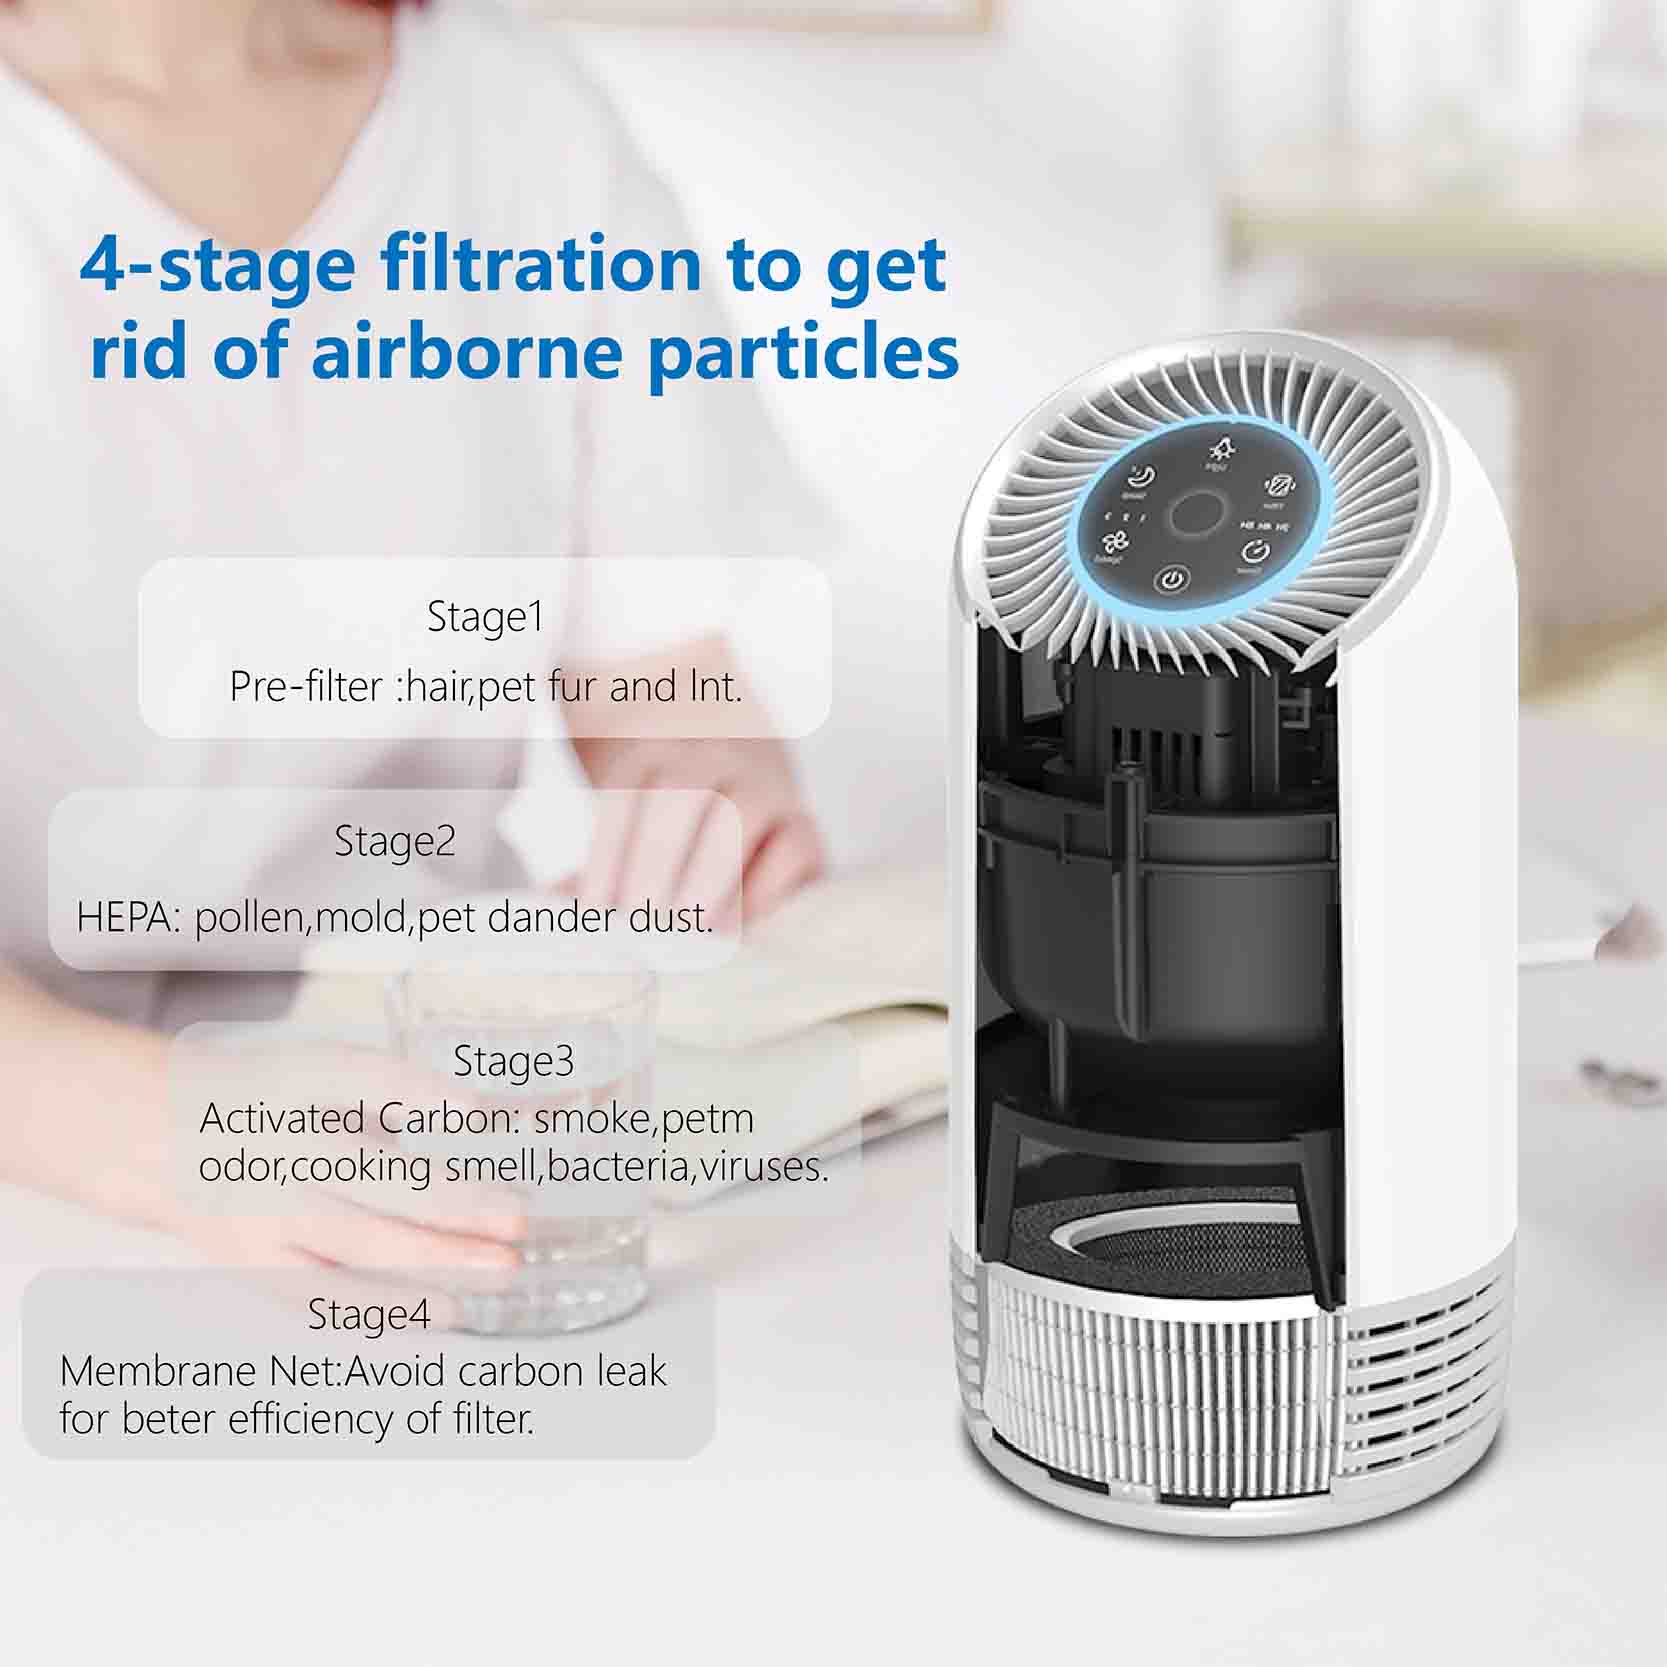 Air purifier with filter